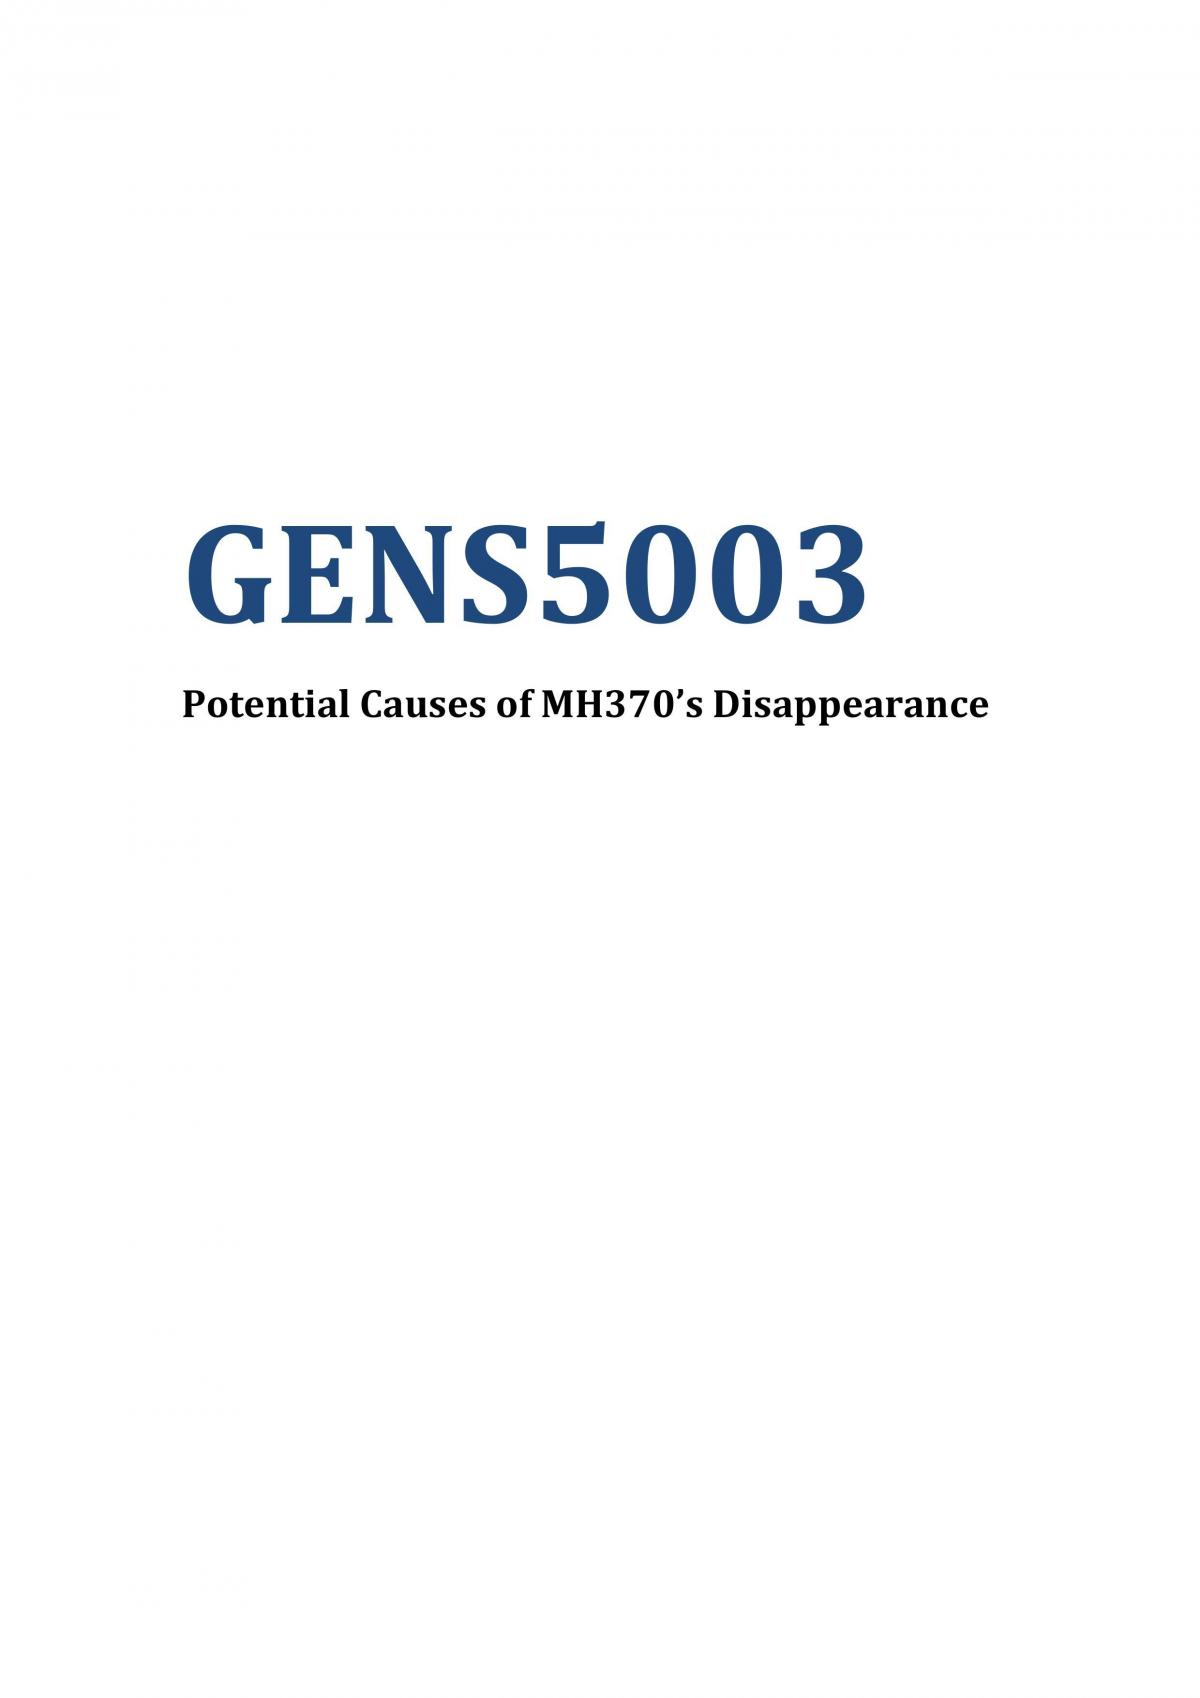 MH370 disappearance - Page 1